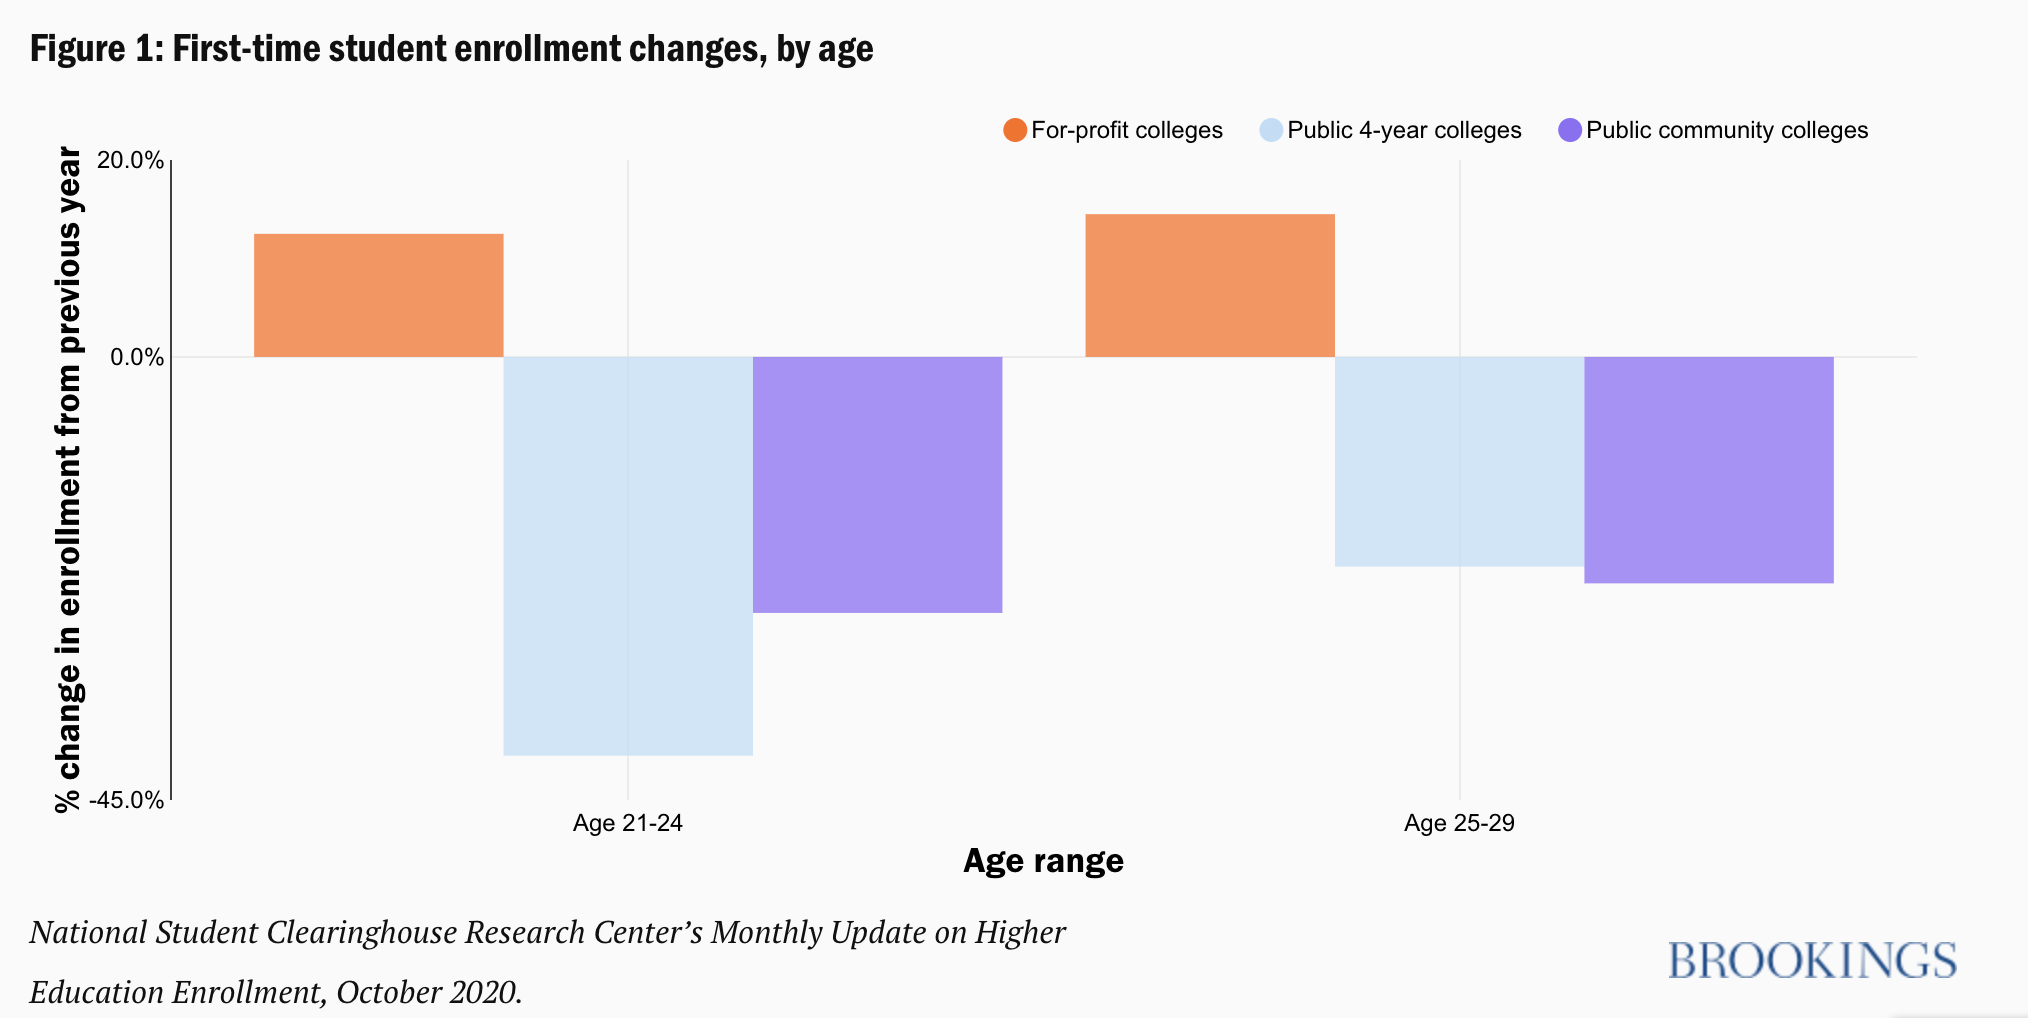 Graph showing the changes in first-time student enrollment in for-profit colleges, public 4-year colleges, and public community colleges. The only one seeing an increase in enrollment are for-profit colleges.